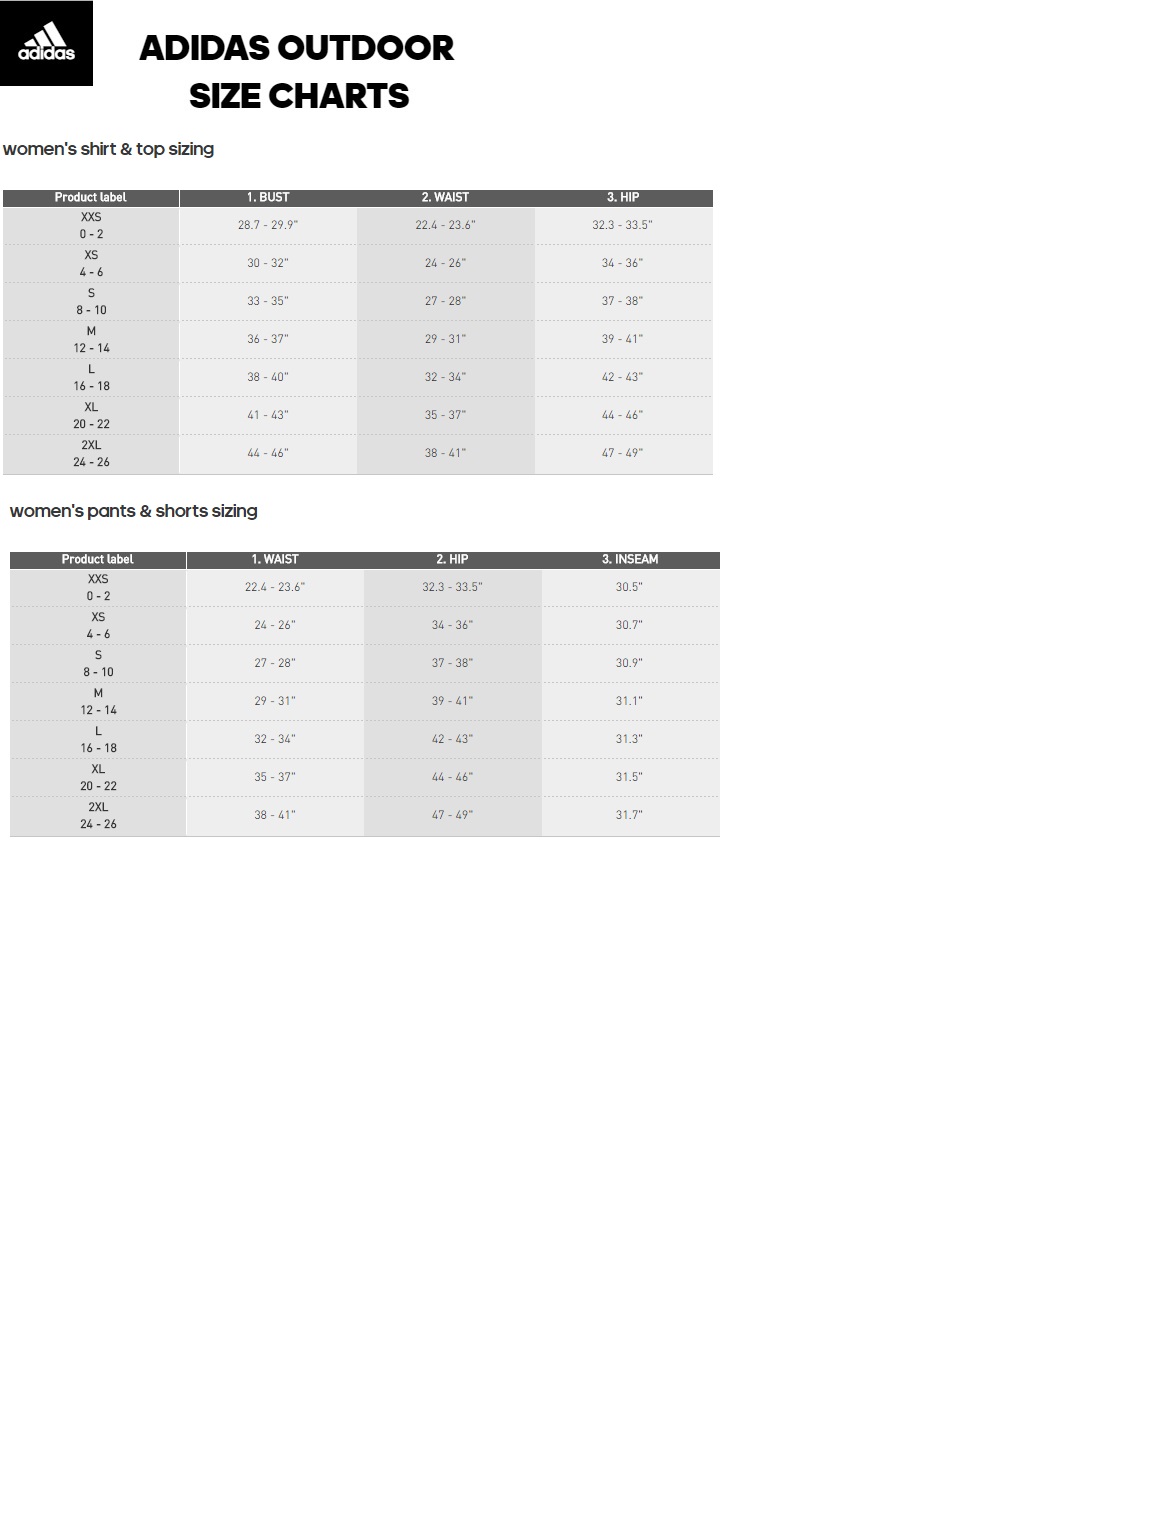 Adidas Childrens Clothing Size Chart